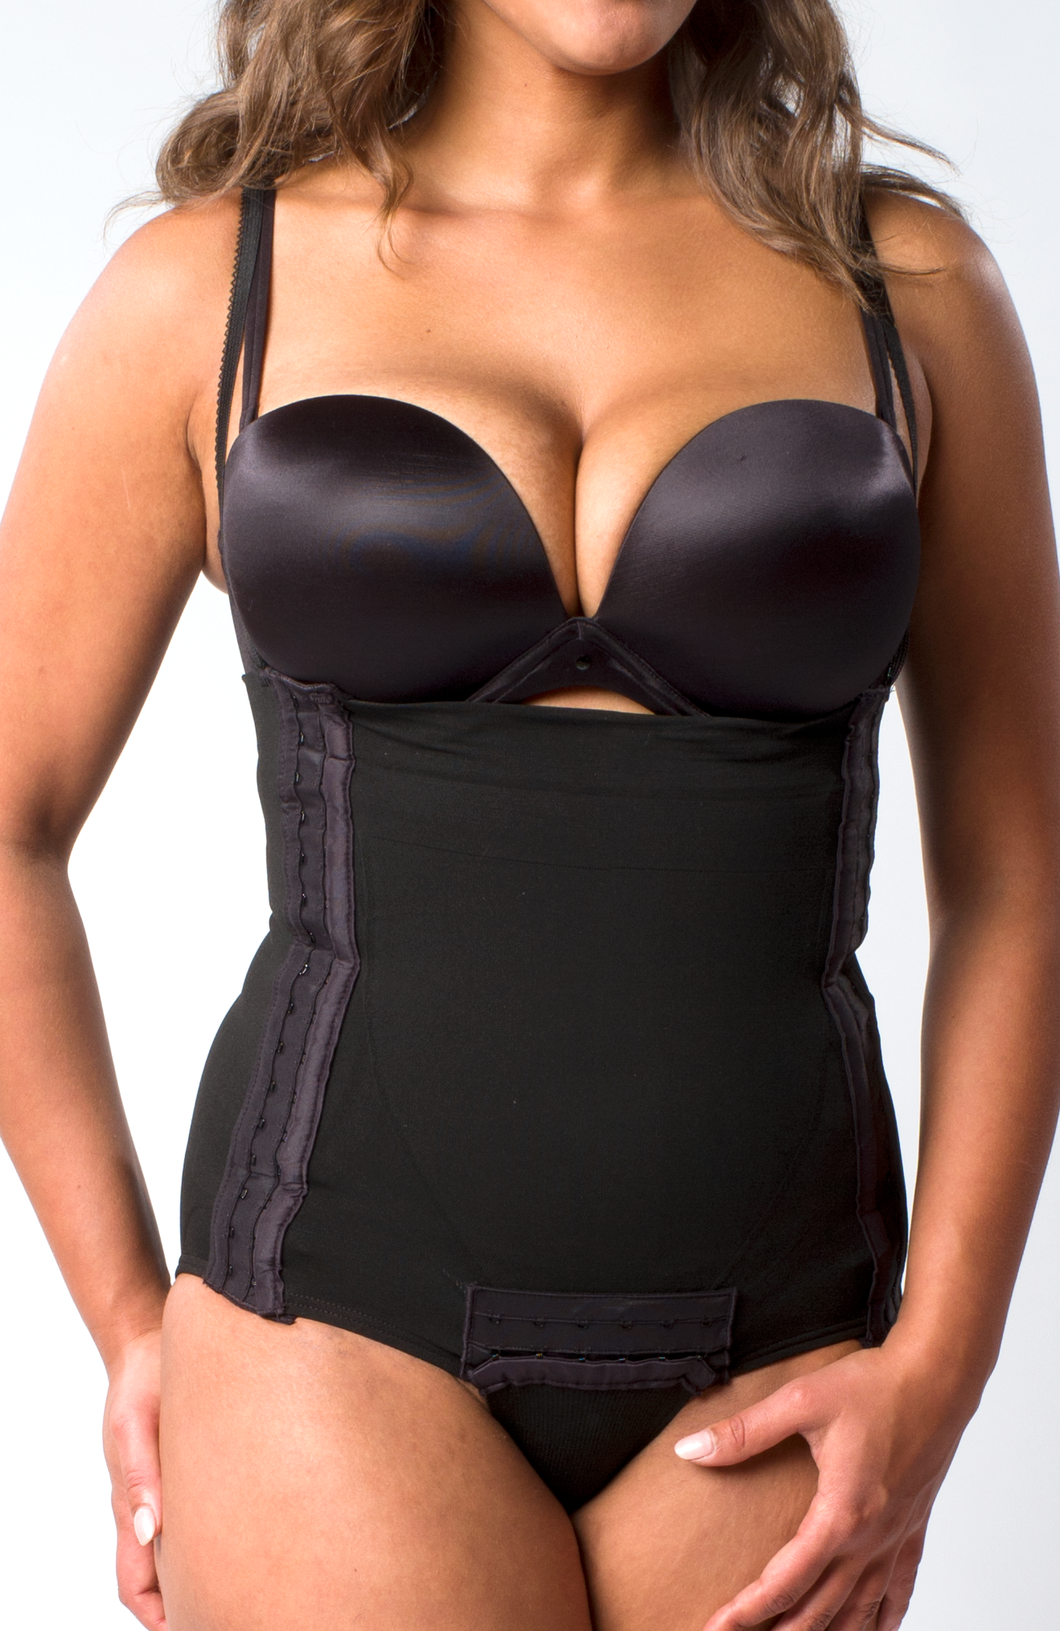 Angel Curves - Our double compression waist trainers are back in